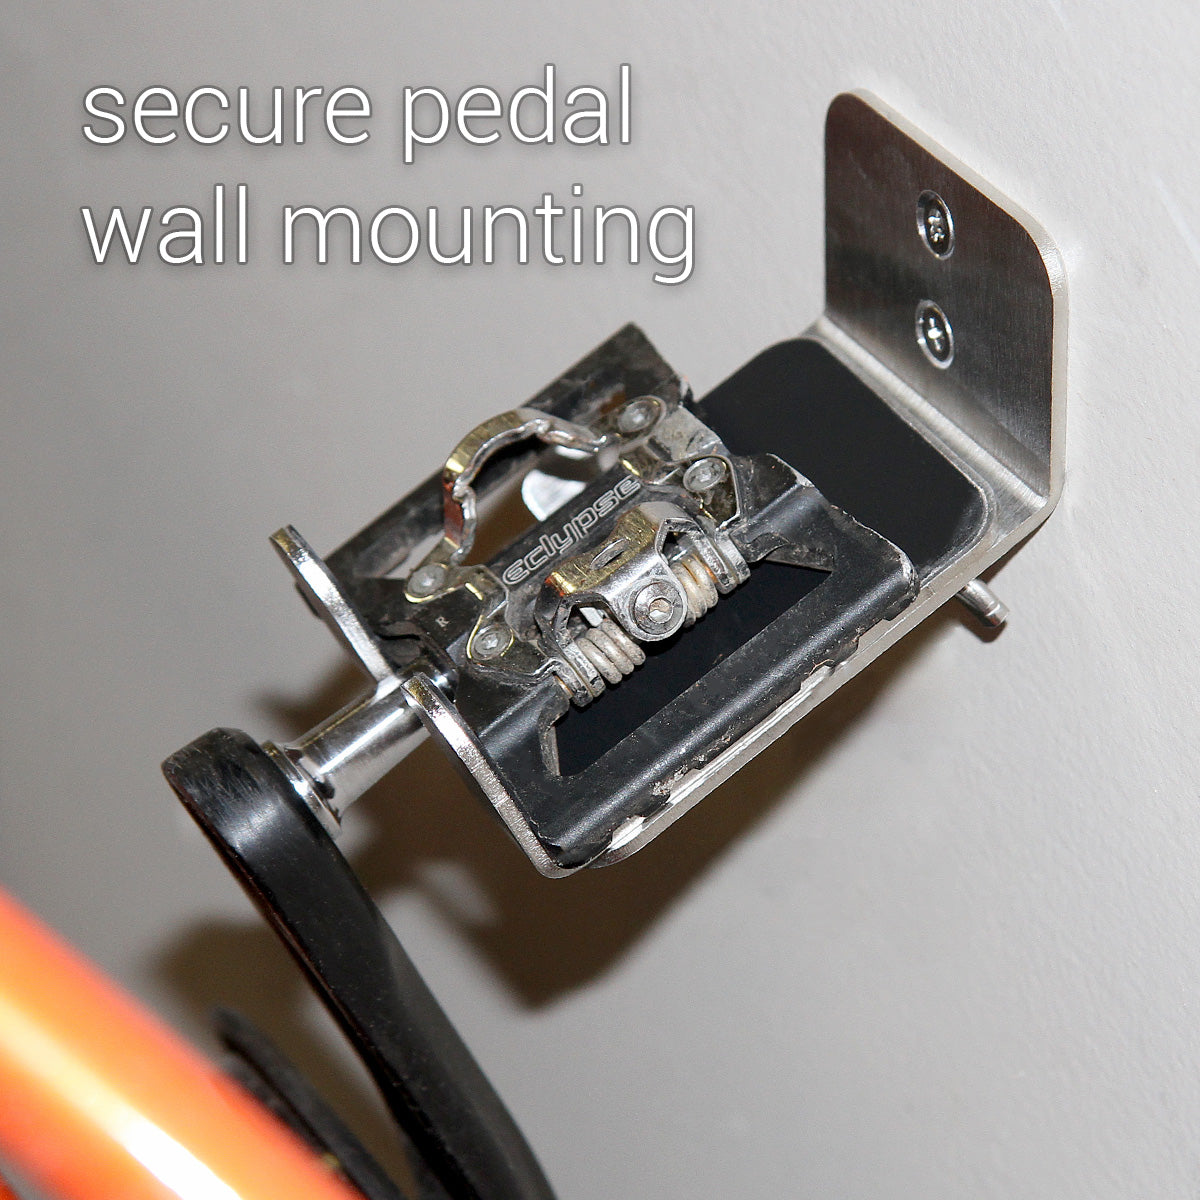 Stainless Steel Adjustable Bike Pedal Wall Mount